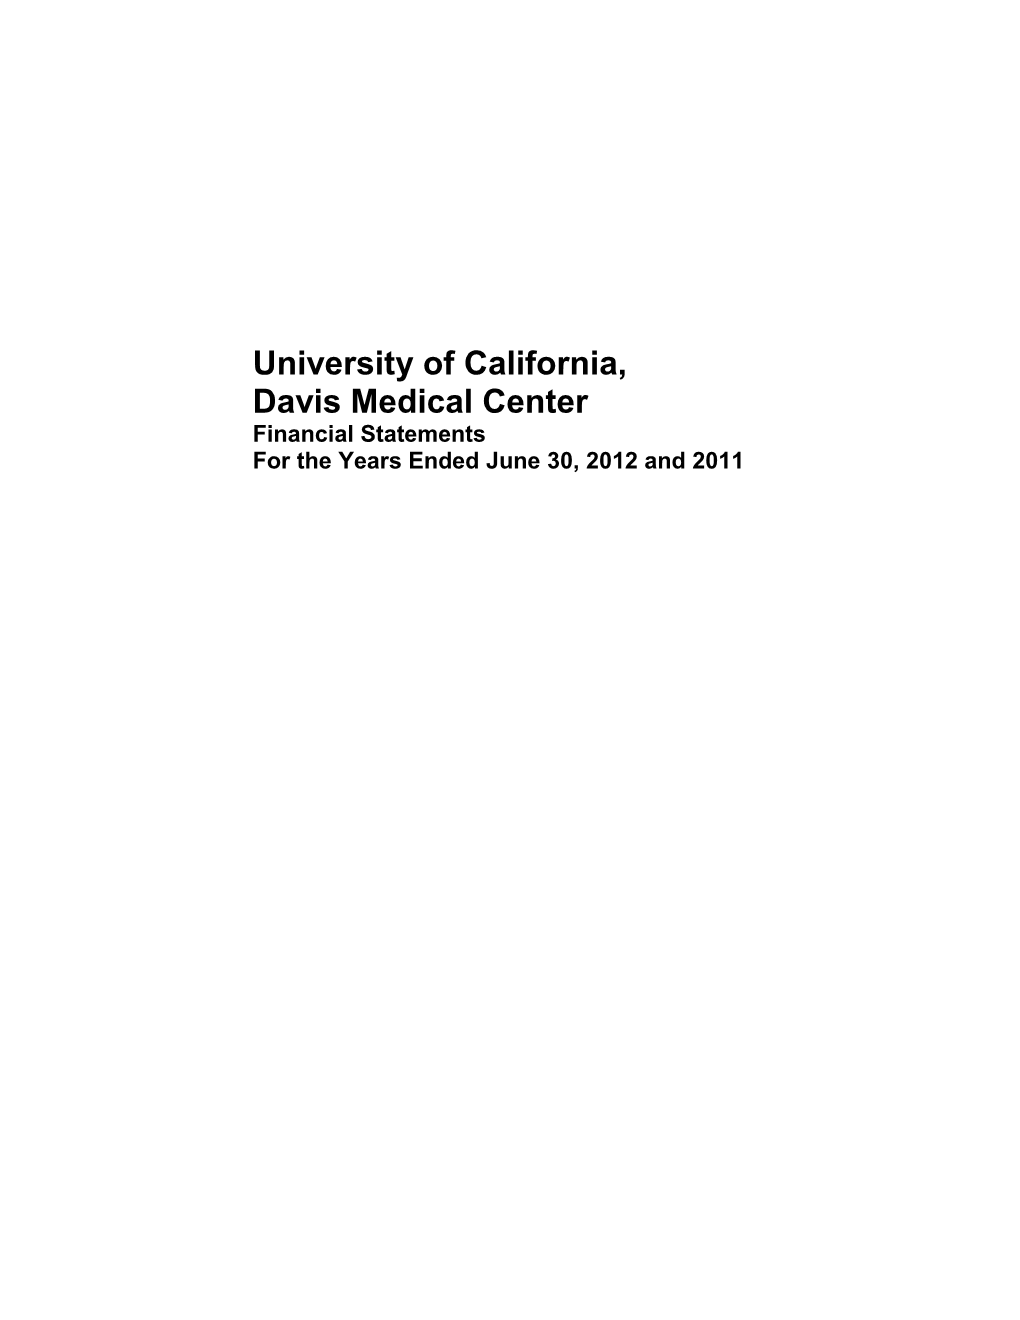 University of California, Davis Medical Center Financial Statements for the Years Ended June 30, 2012 and 2011